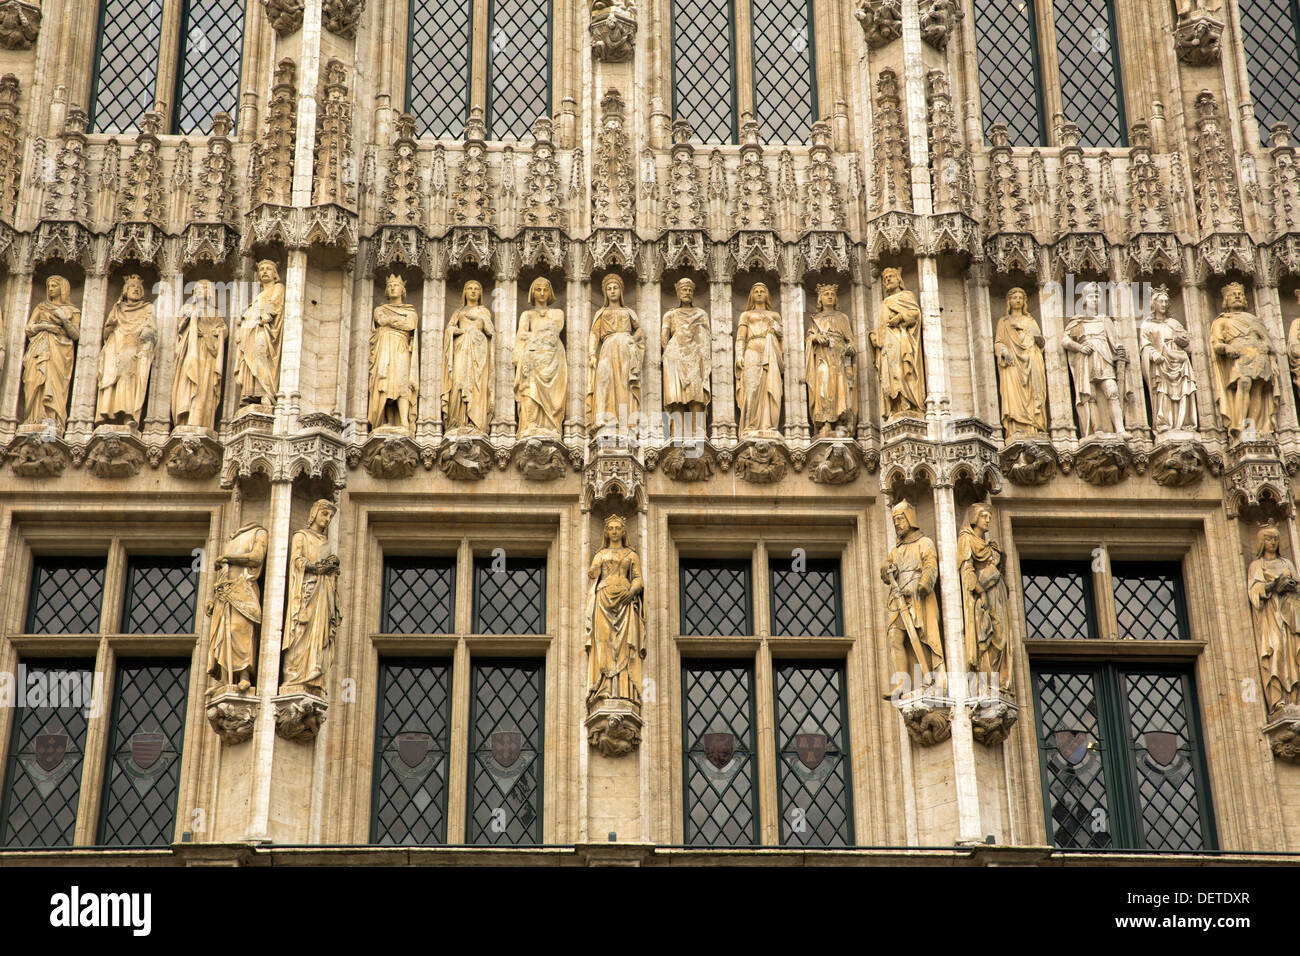 Figures carved on the facade of the Hotel de Ville in Brussels Belgium Stock Photo